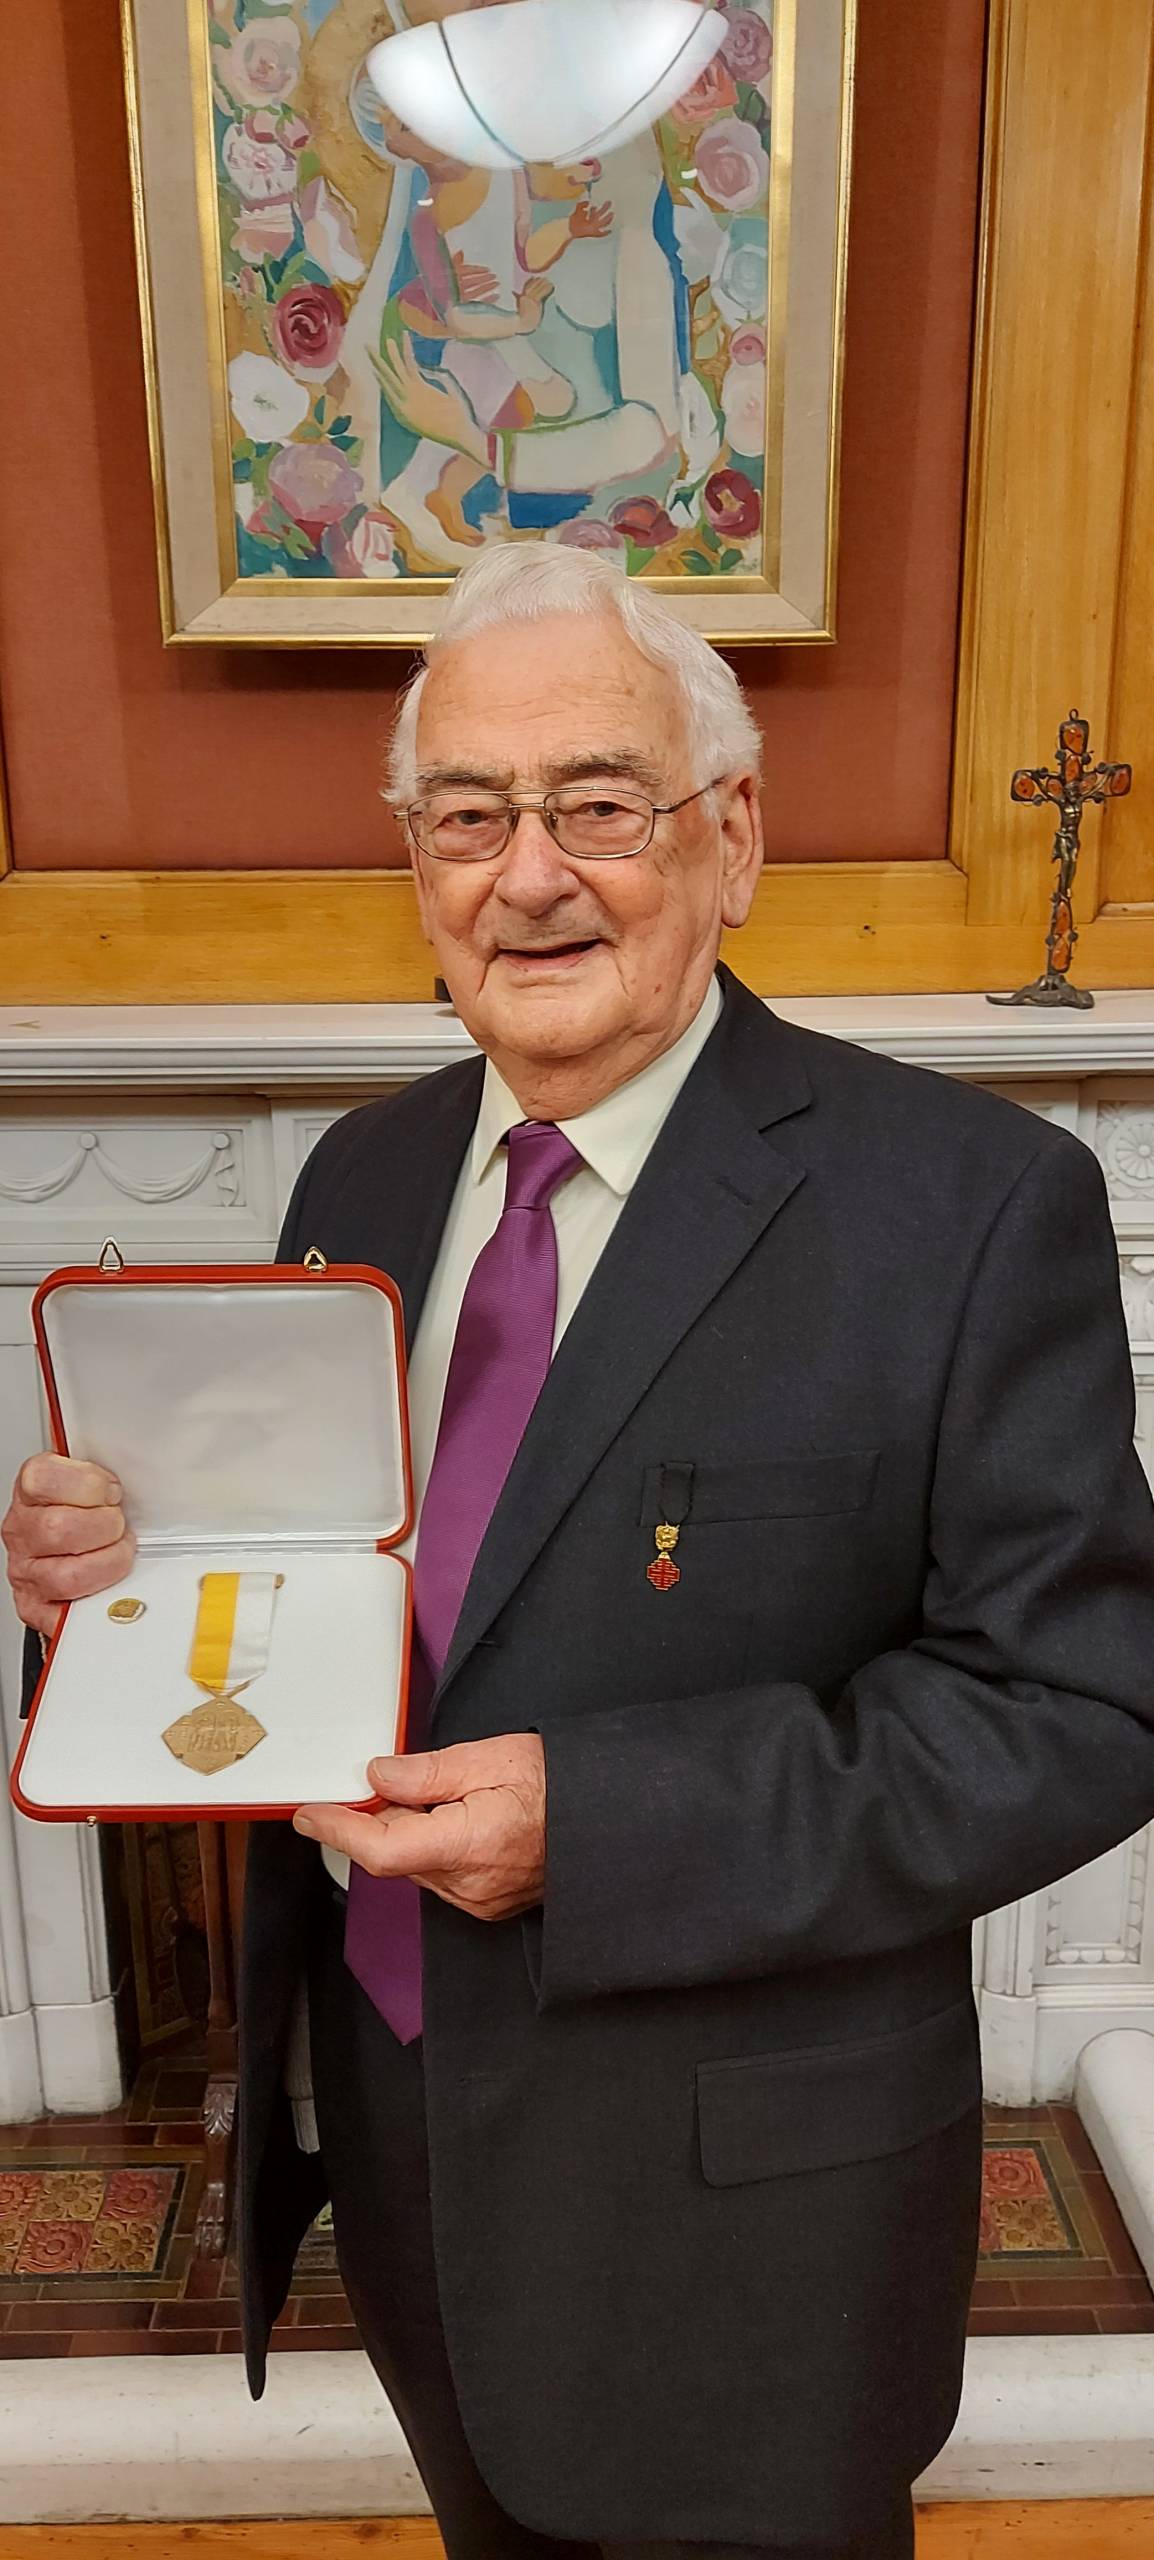 Pope Francis award for Dominic Dowling